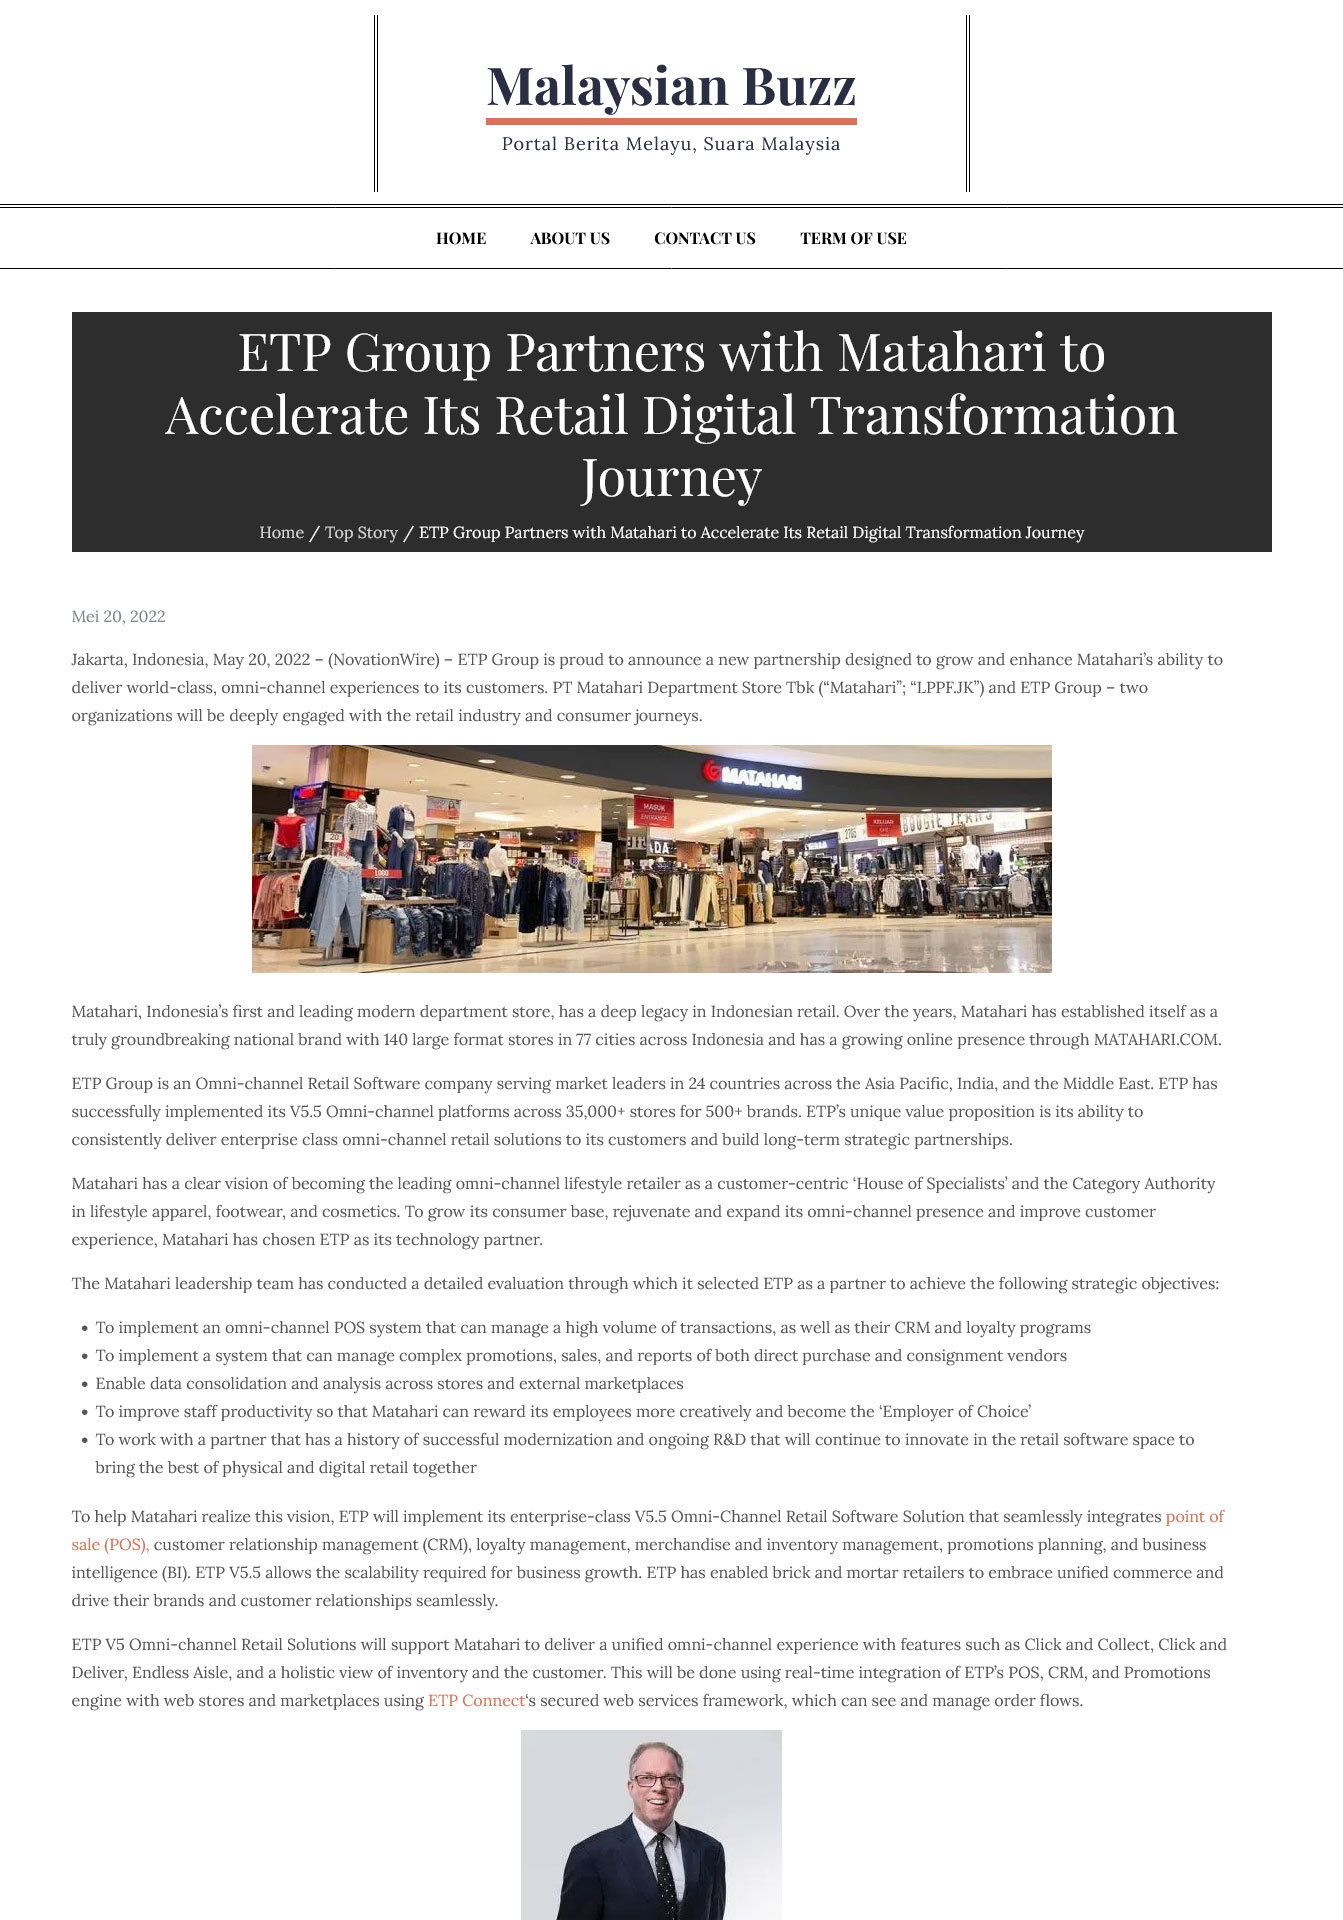 Malaysian Buzz: ETP Group Partners with Matahari to Accelerate Its Retail Digital Transformation Journey